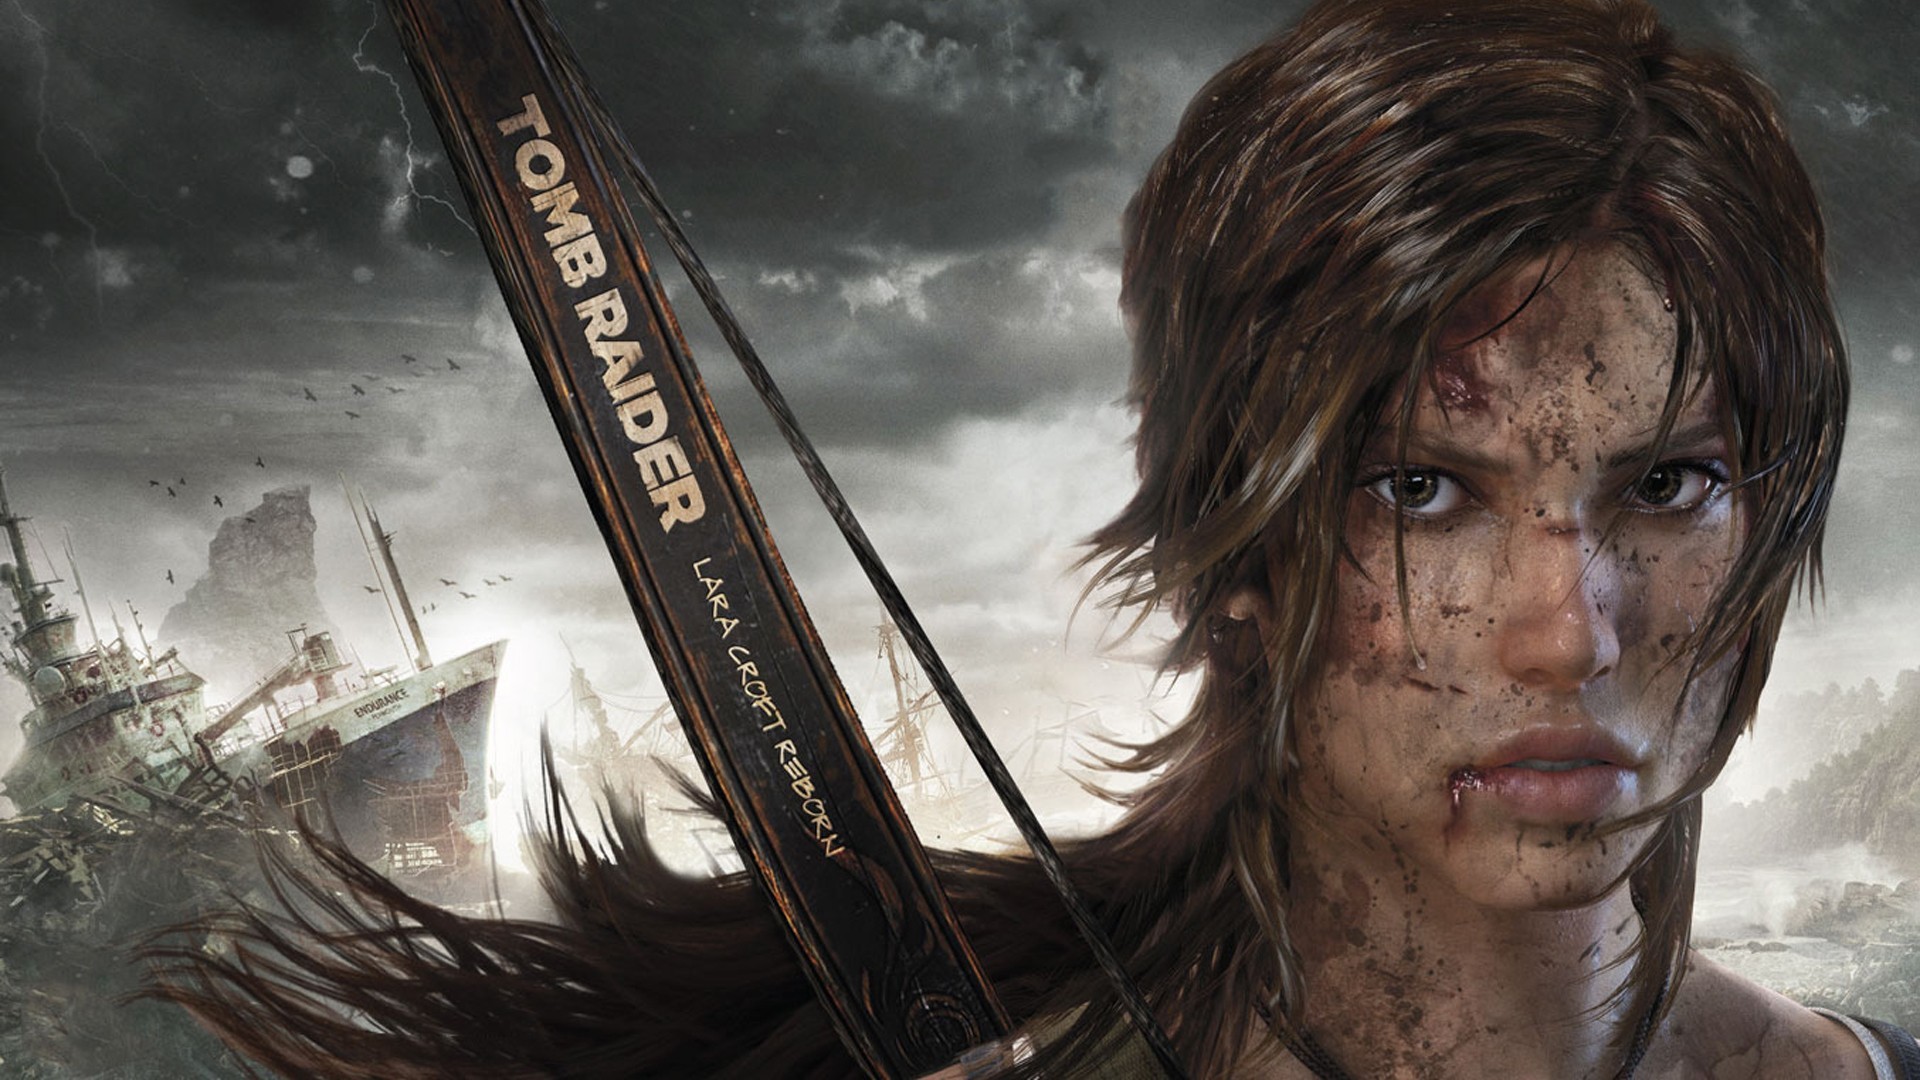 General 1920x1080 Tomb Raider video games video game art brunette blood shipwreck sky storm looking at viewer video game girls women scars bow Lara Croft (Tomb Raider) Tomb Raider (2013) wounds face closeup video game characters